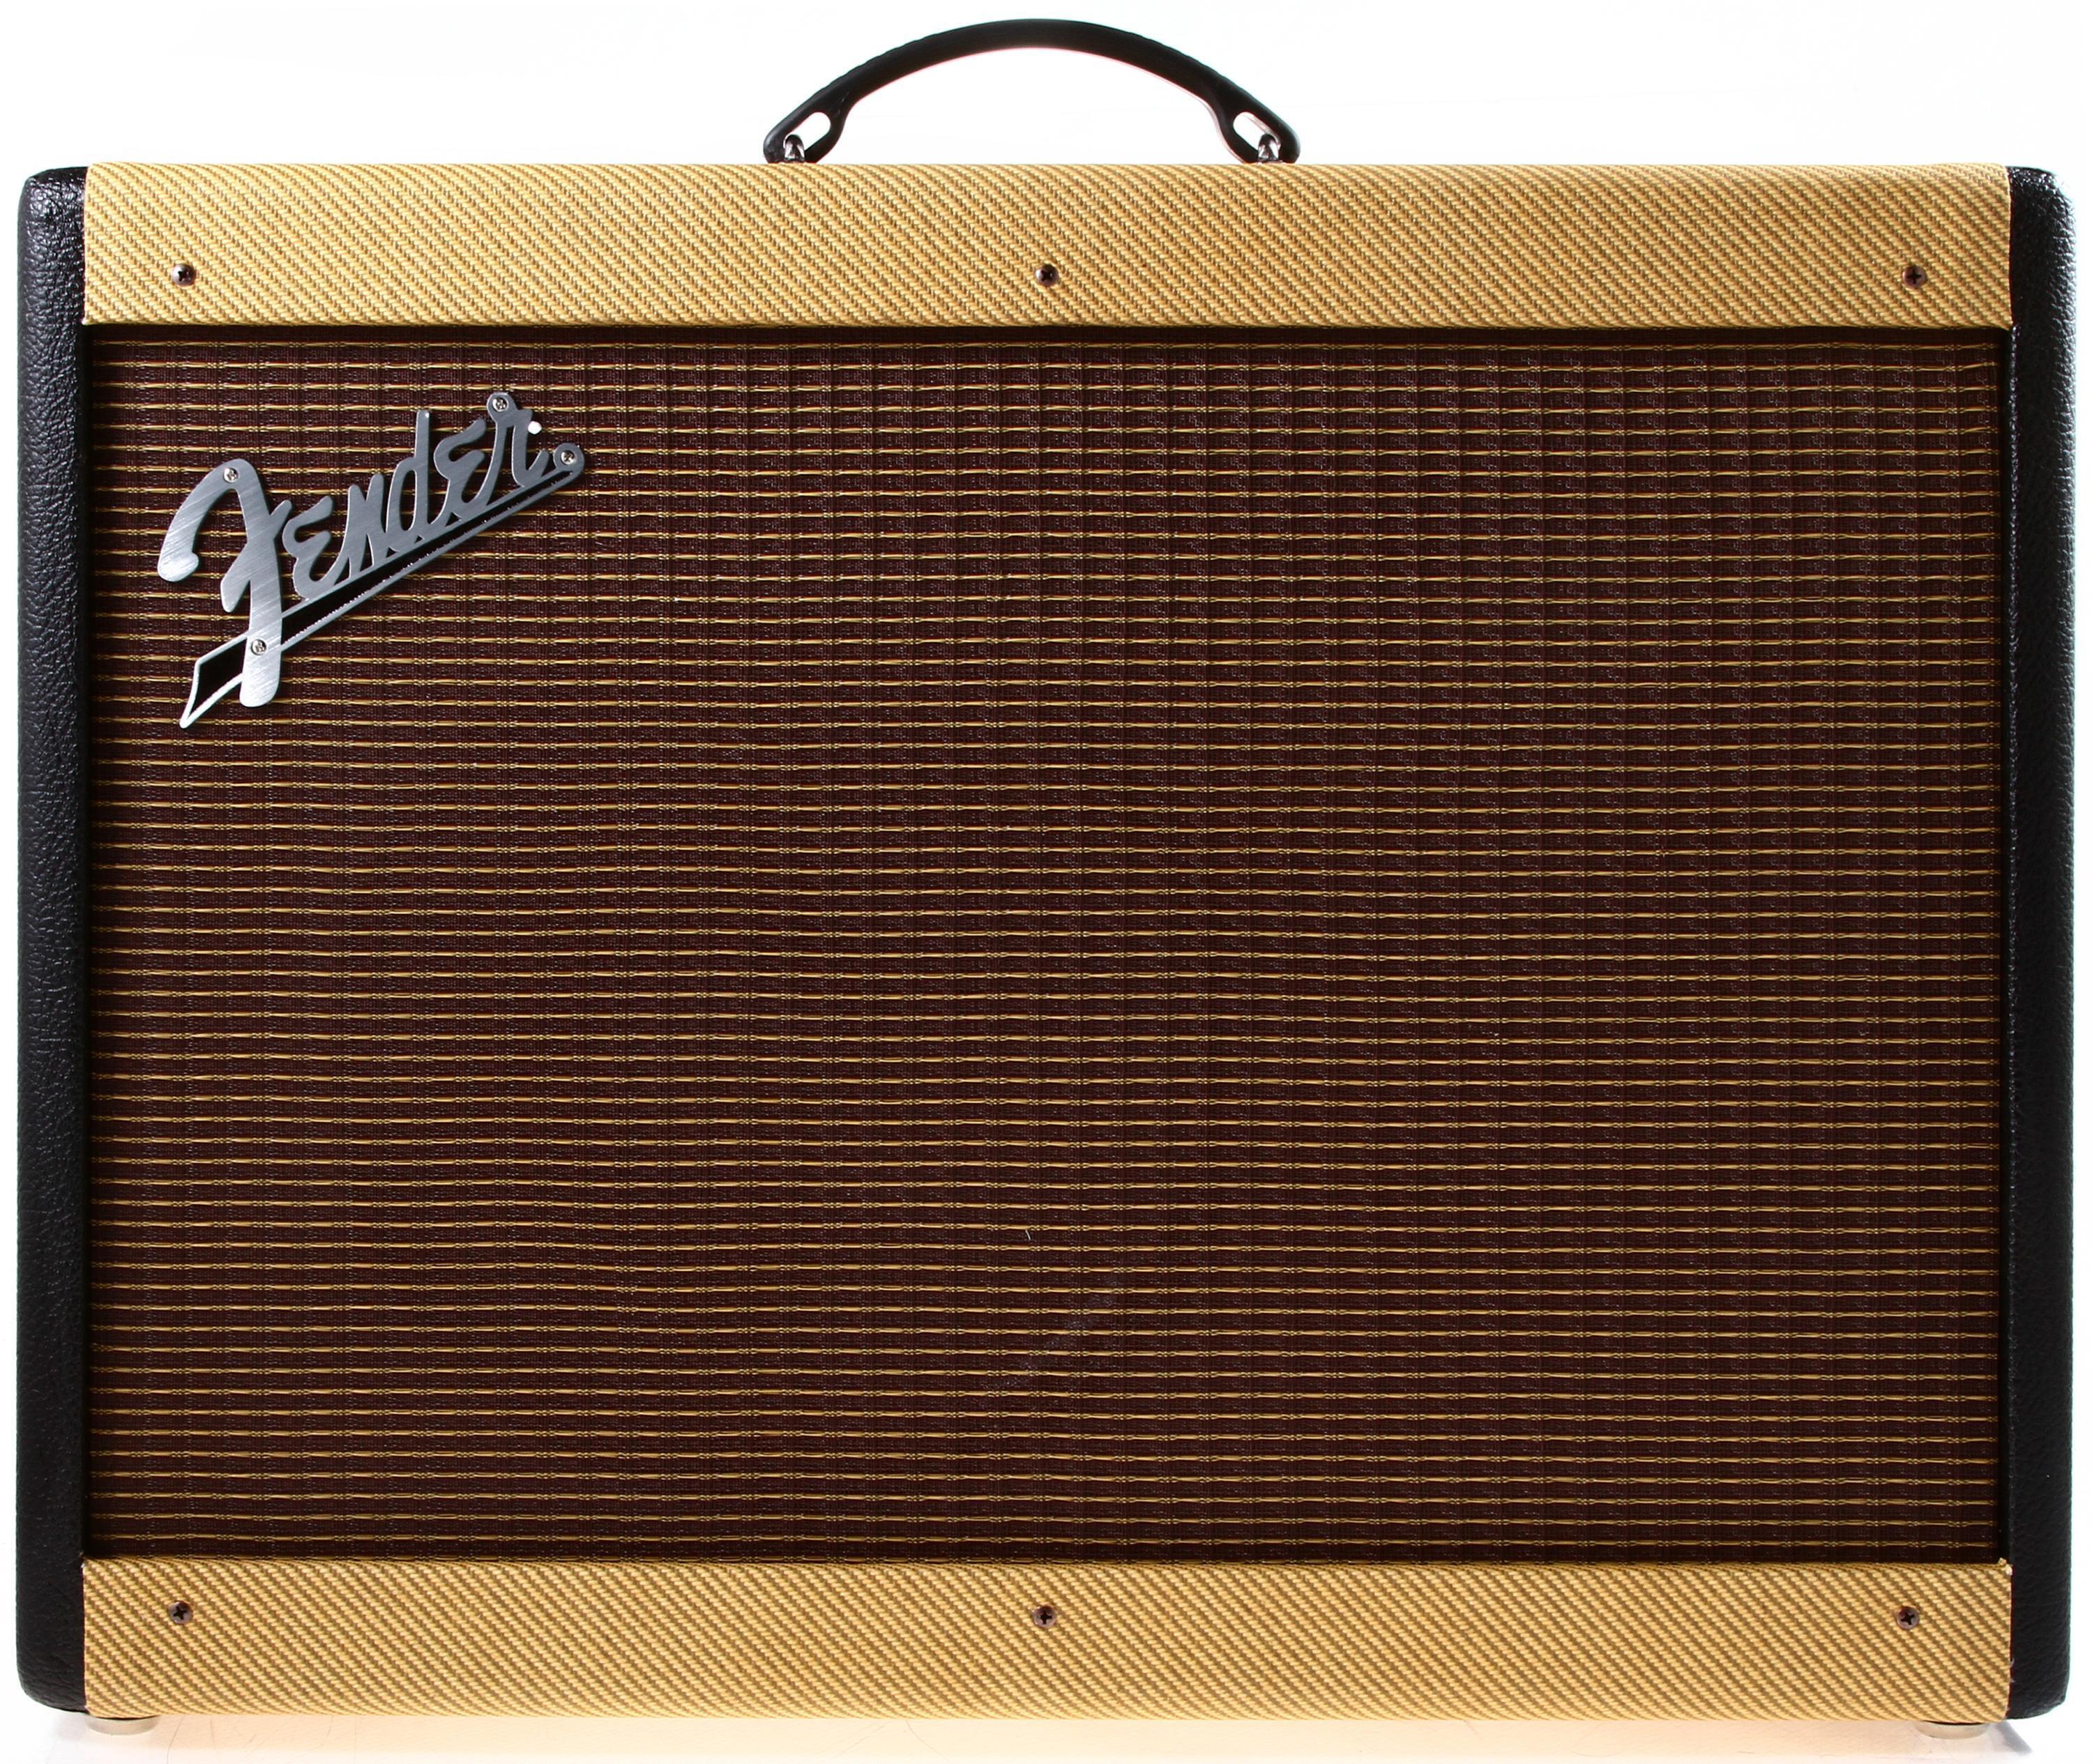 Fender Hot Rod Deluxe III LTD - Two Tone Black and Tweed | Sweetwater